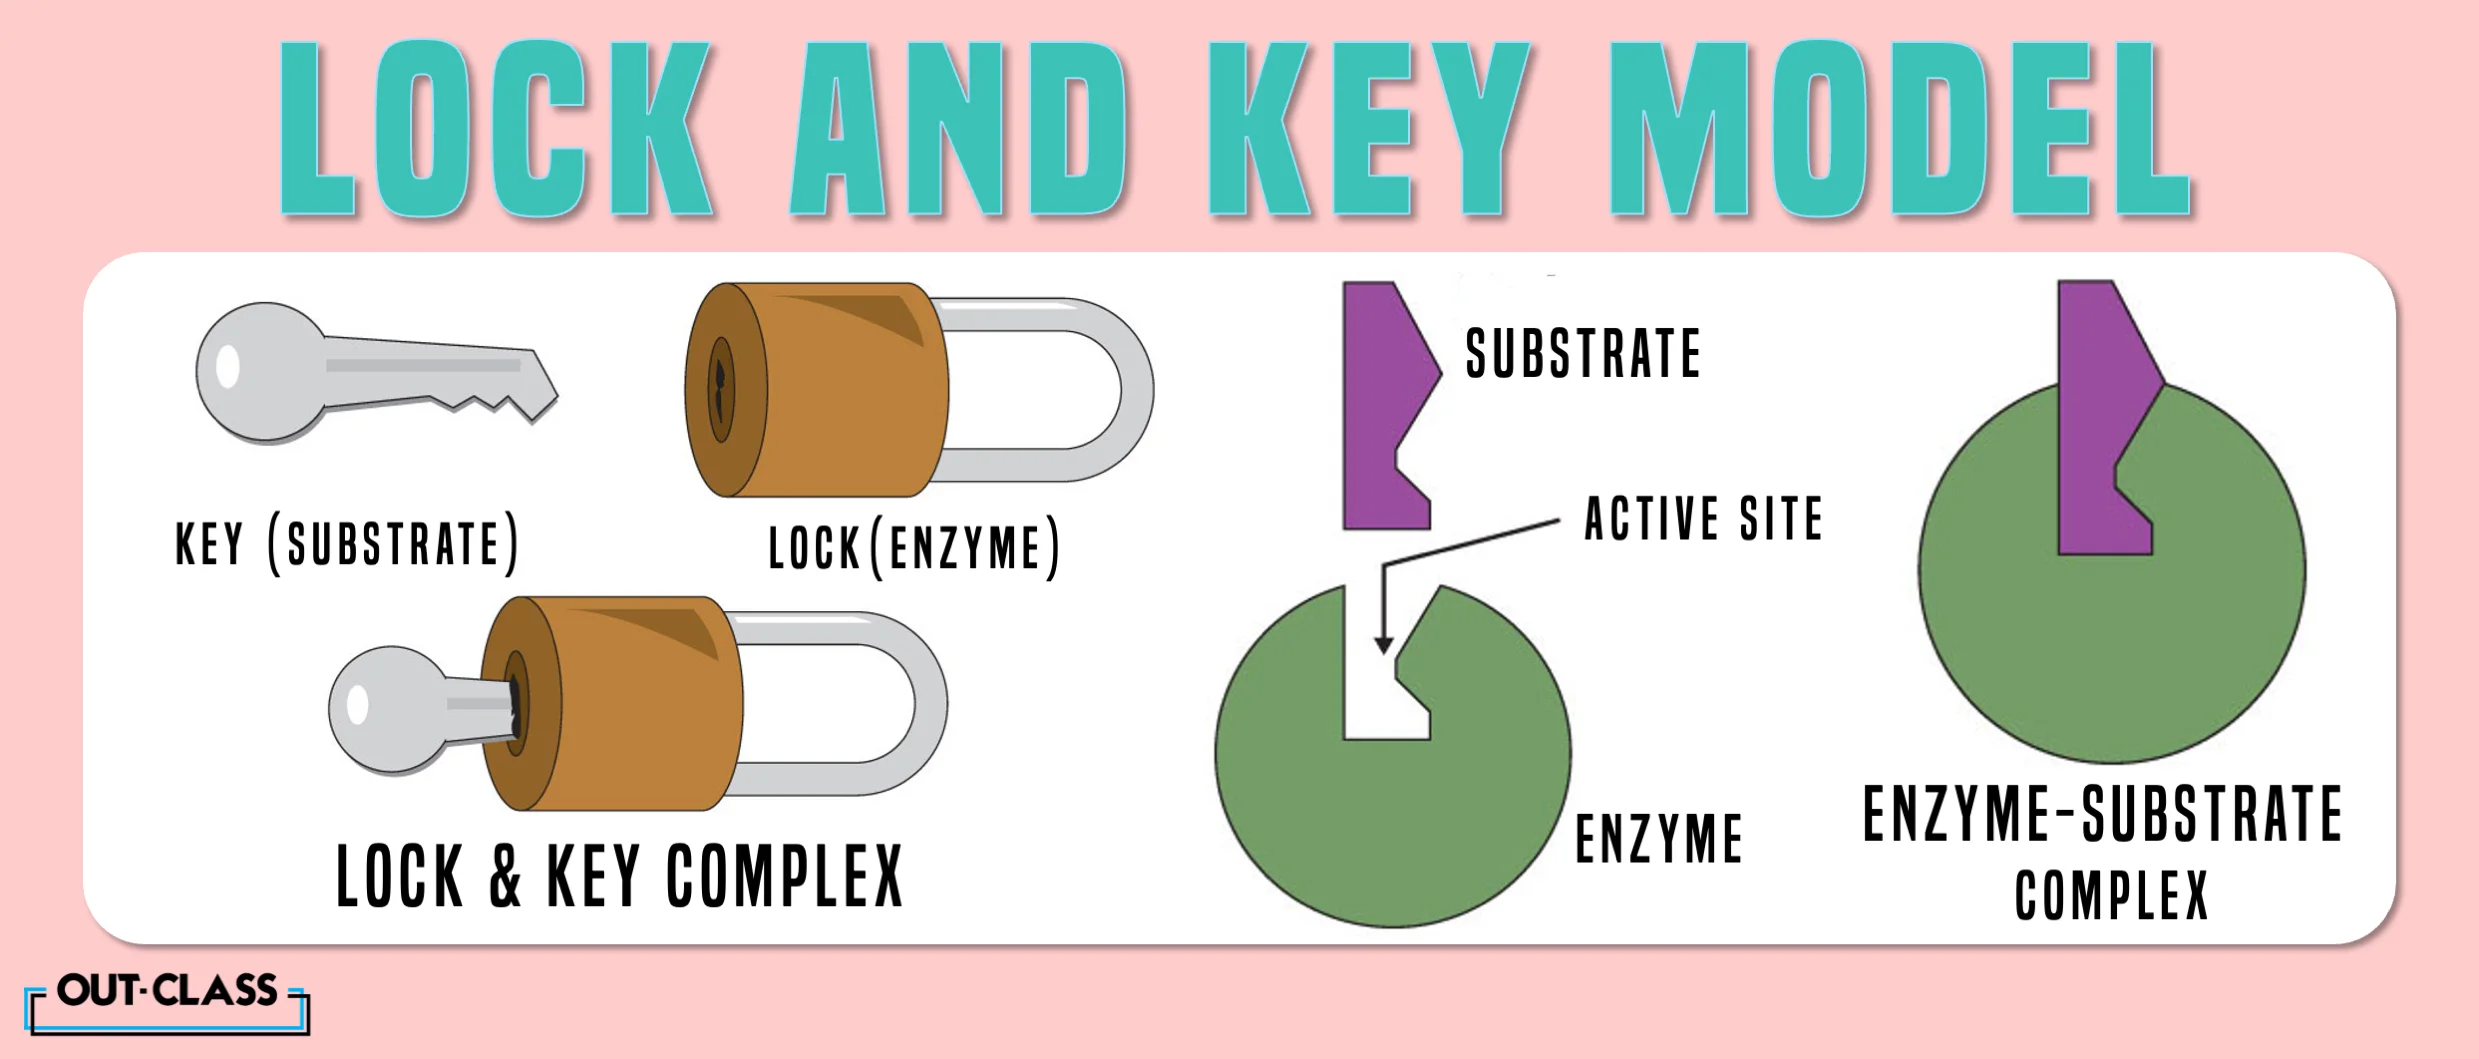 Lock-and-key model Definition and Examples - Biology Online Dictionary